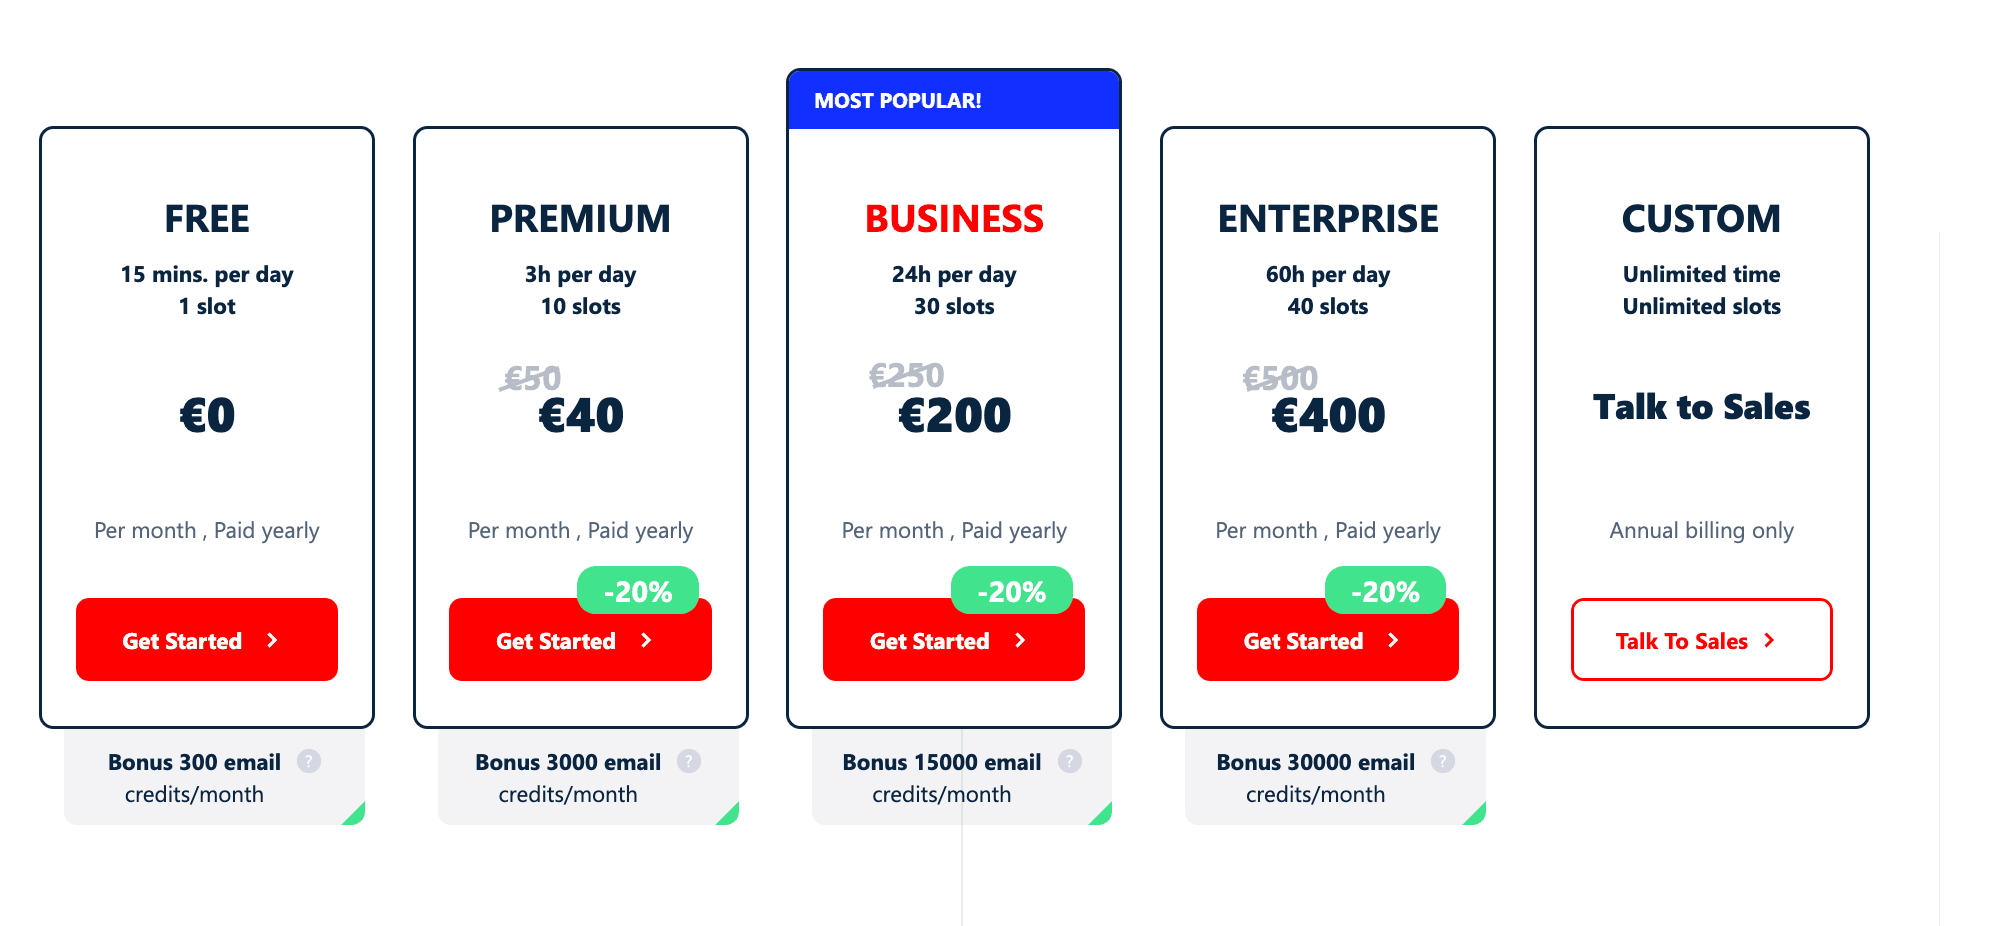 lobstr pricing page - image41.png